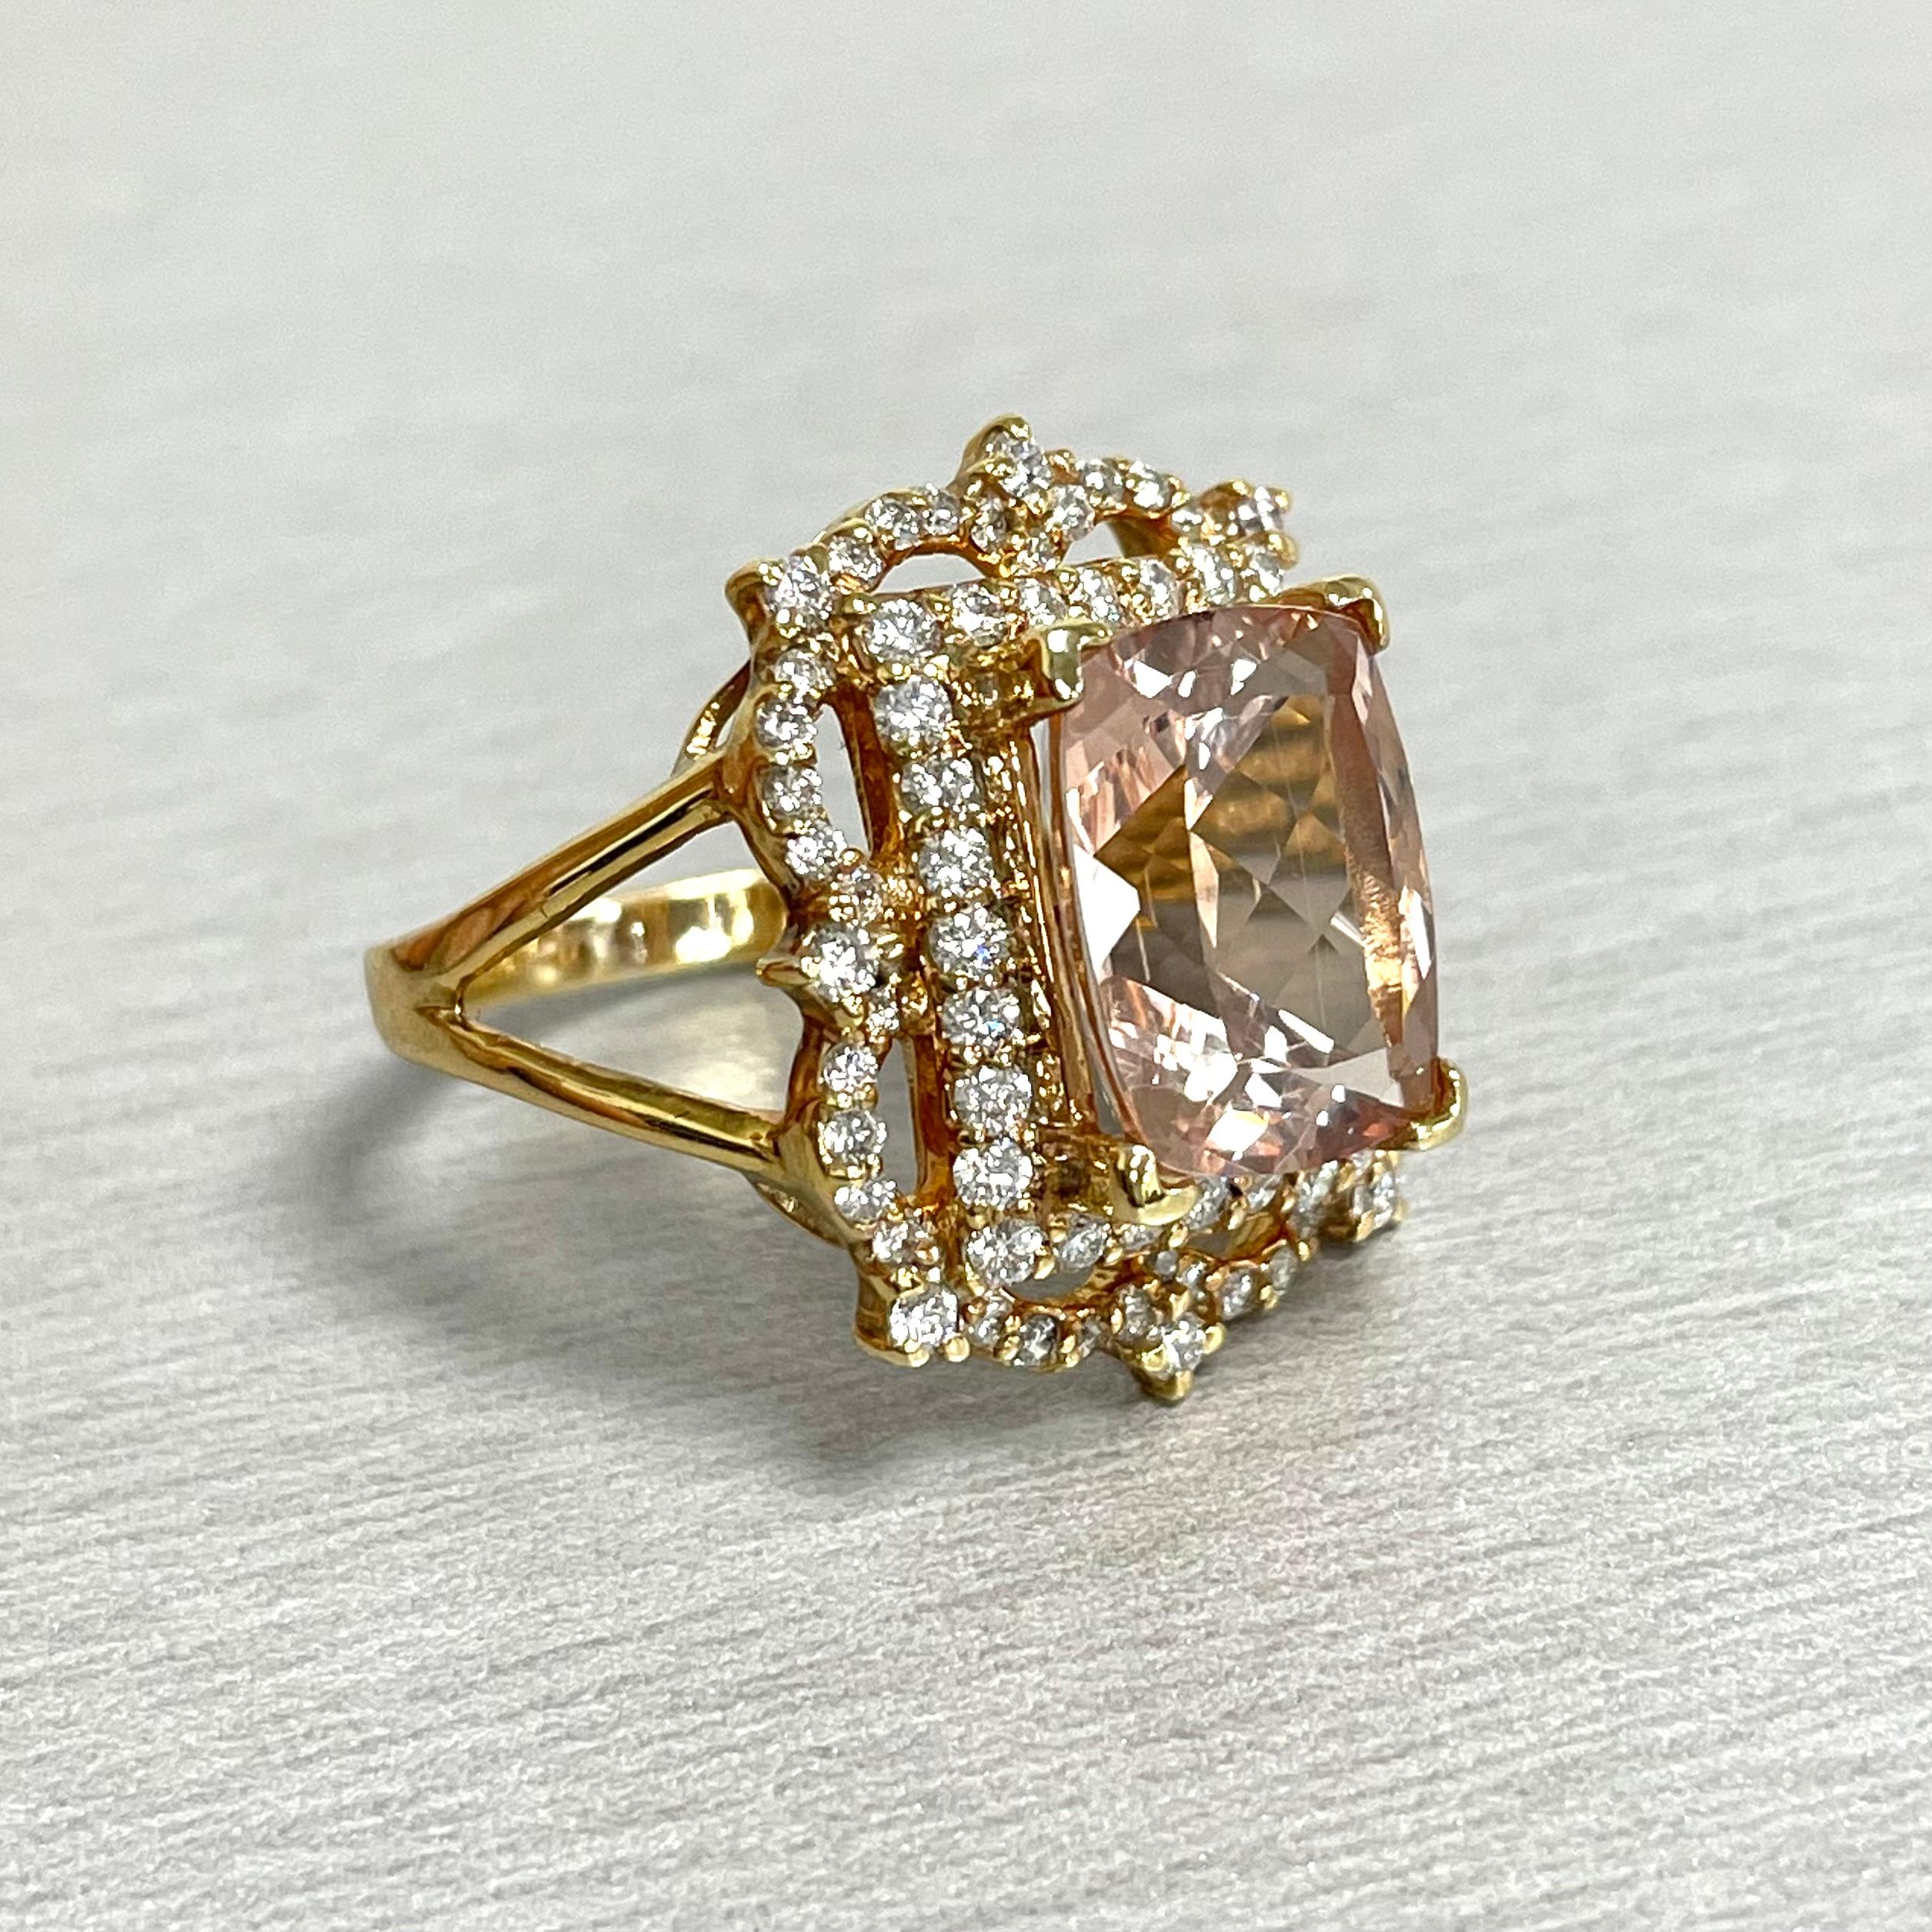 Beauvince Frame Morganite & Diamond Ring '5.35 Ct Morganite', in Yellow Gold In New Condition For Sale In New York, NY